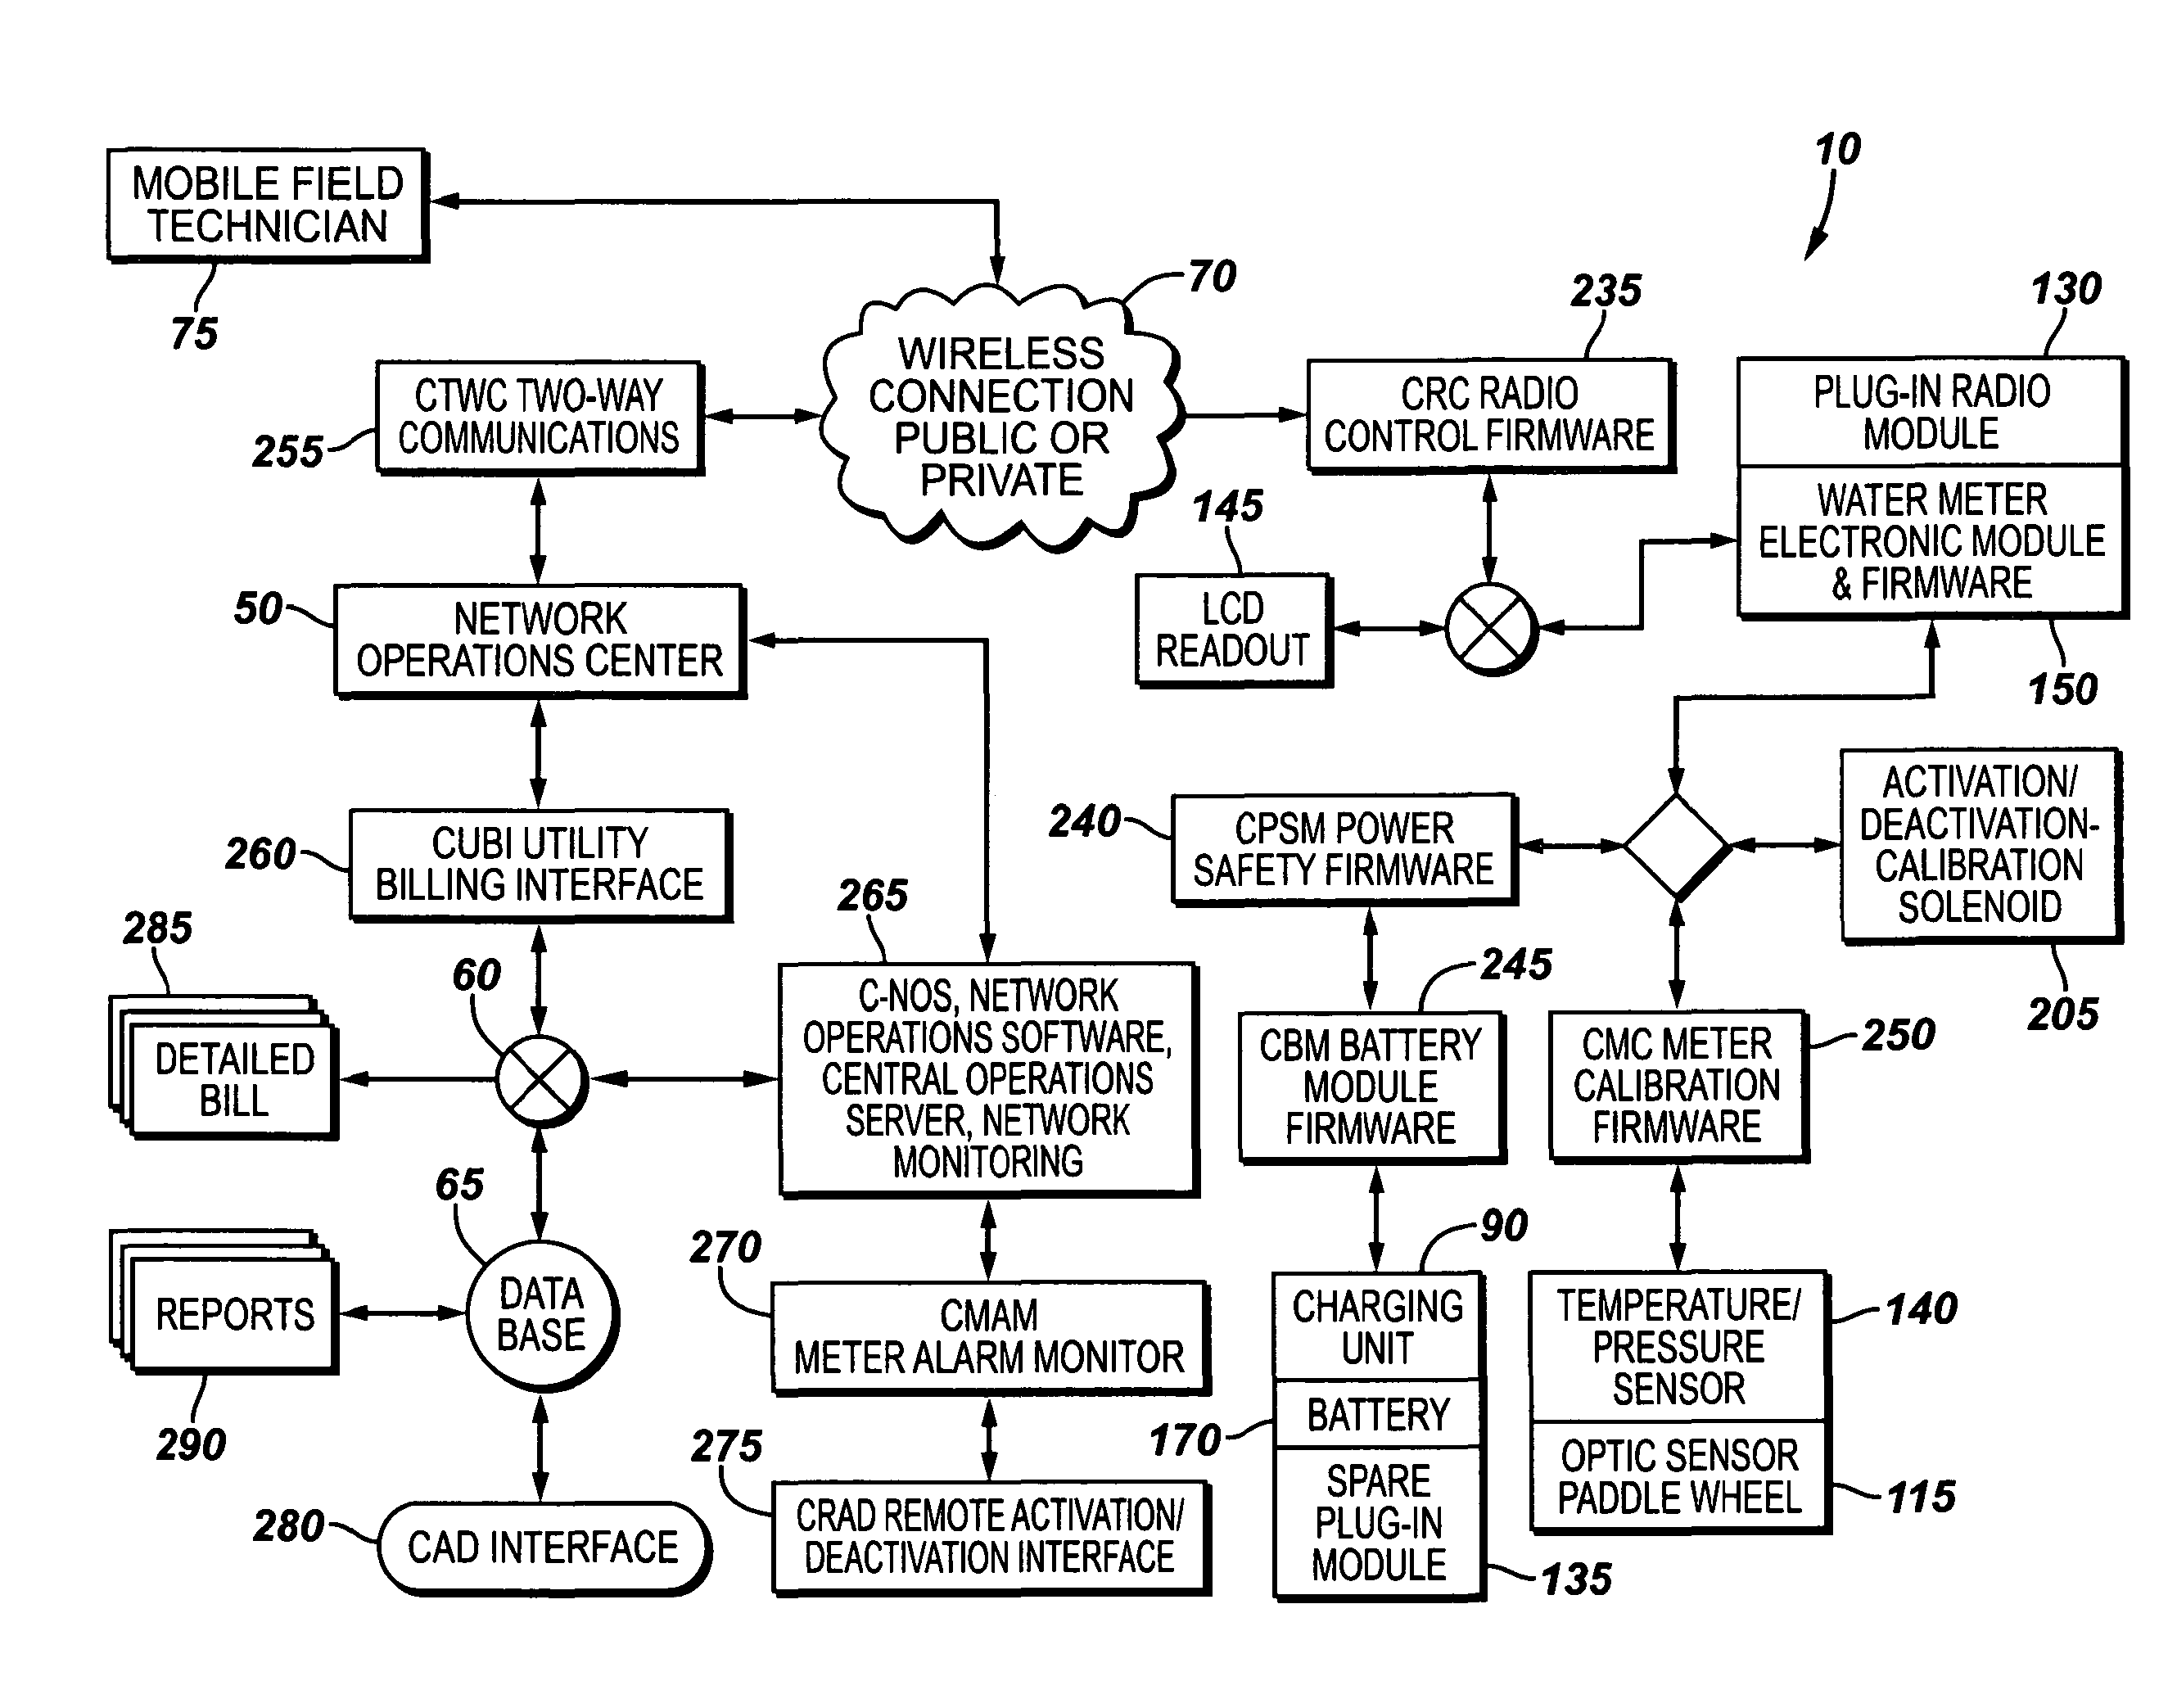 System and method for remotely monitoring and controlling a water meter